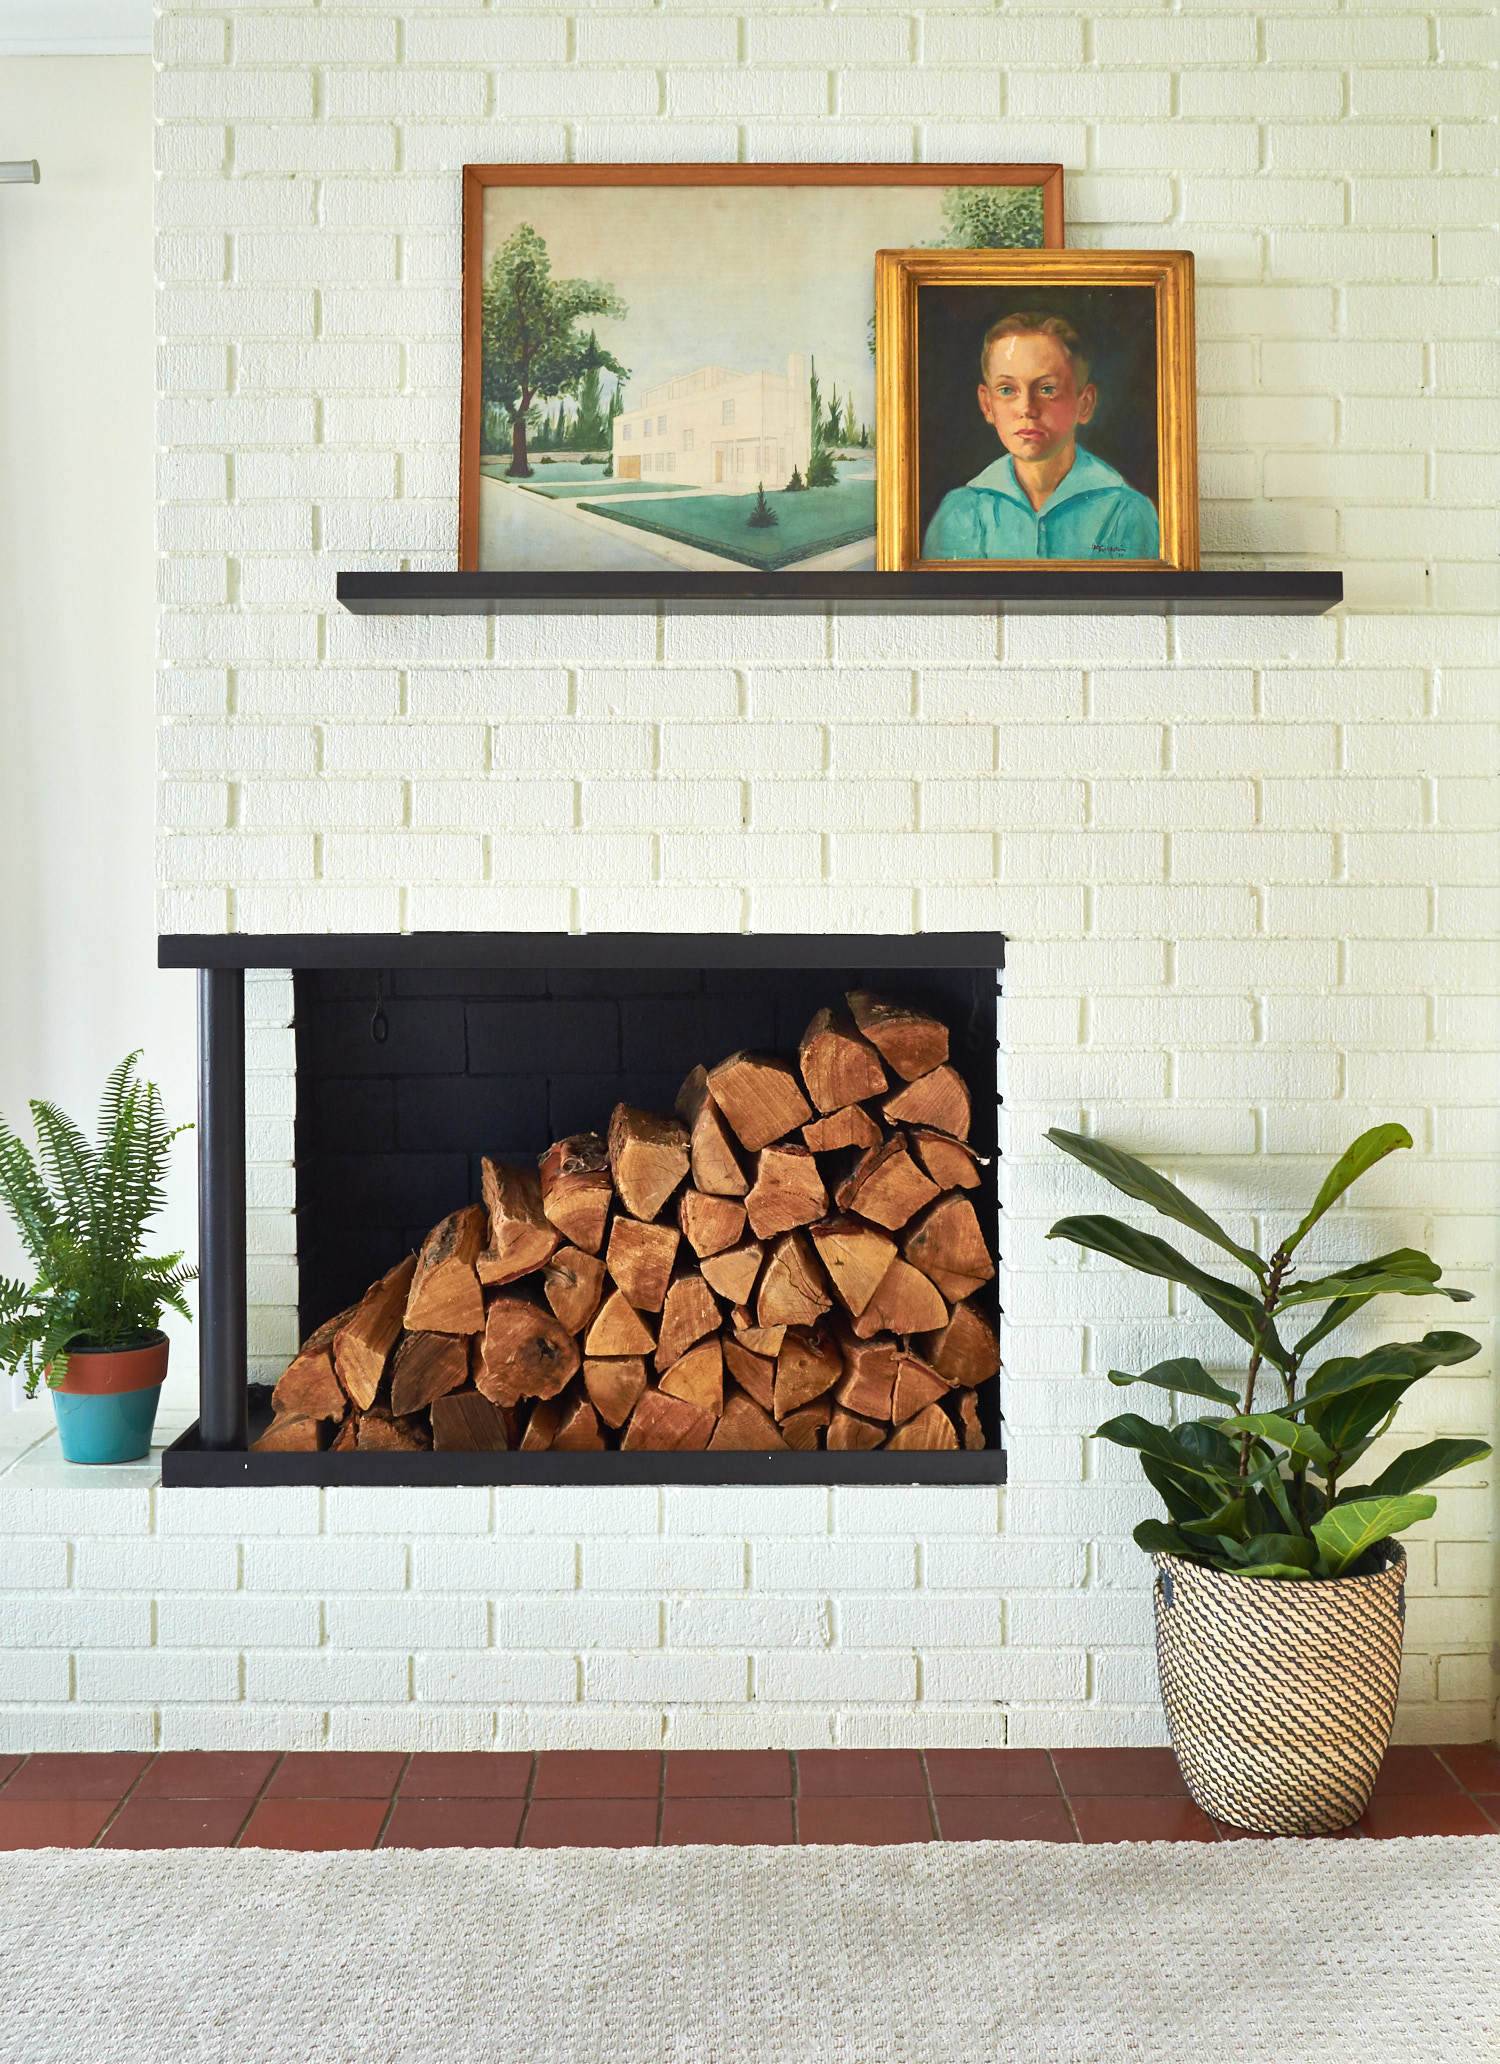 Fireplace built inside a brick wall with a wood shelf above that holds two framed pictures.